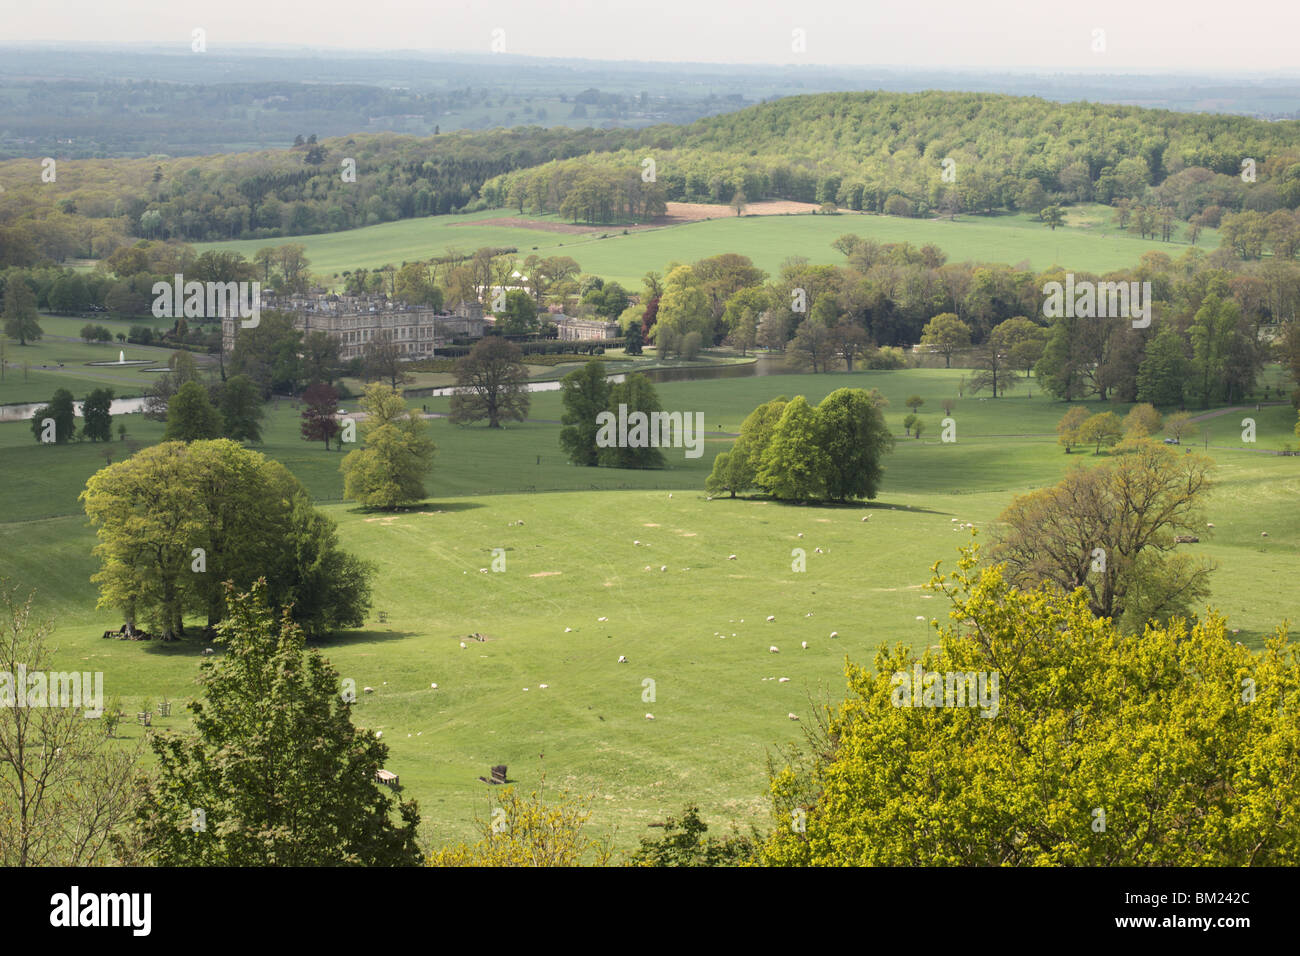 View from Heavens Gate towards Longleat House of the Longleat Estate, Wiltshire, England, UK Stock Photo